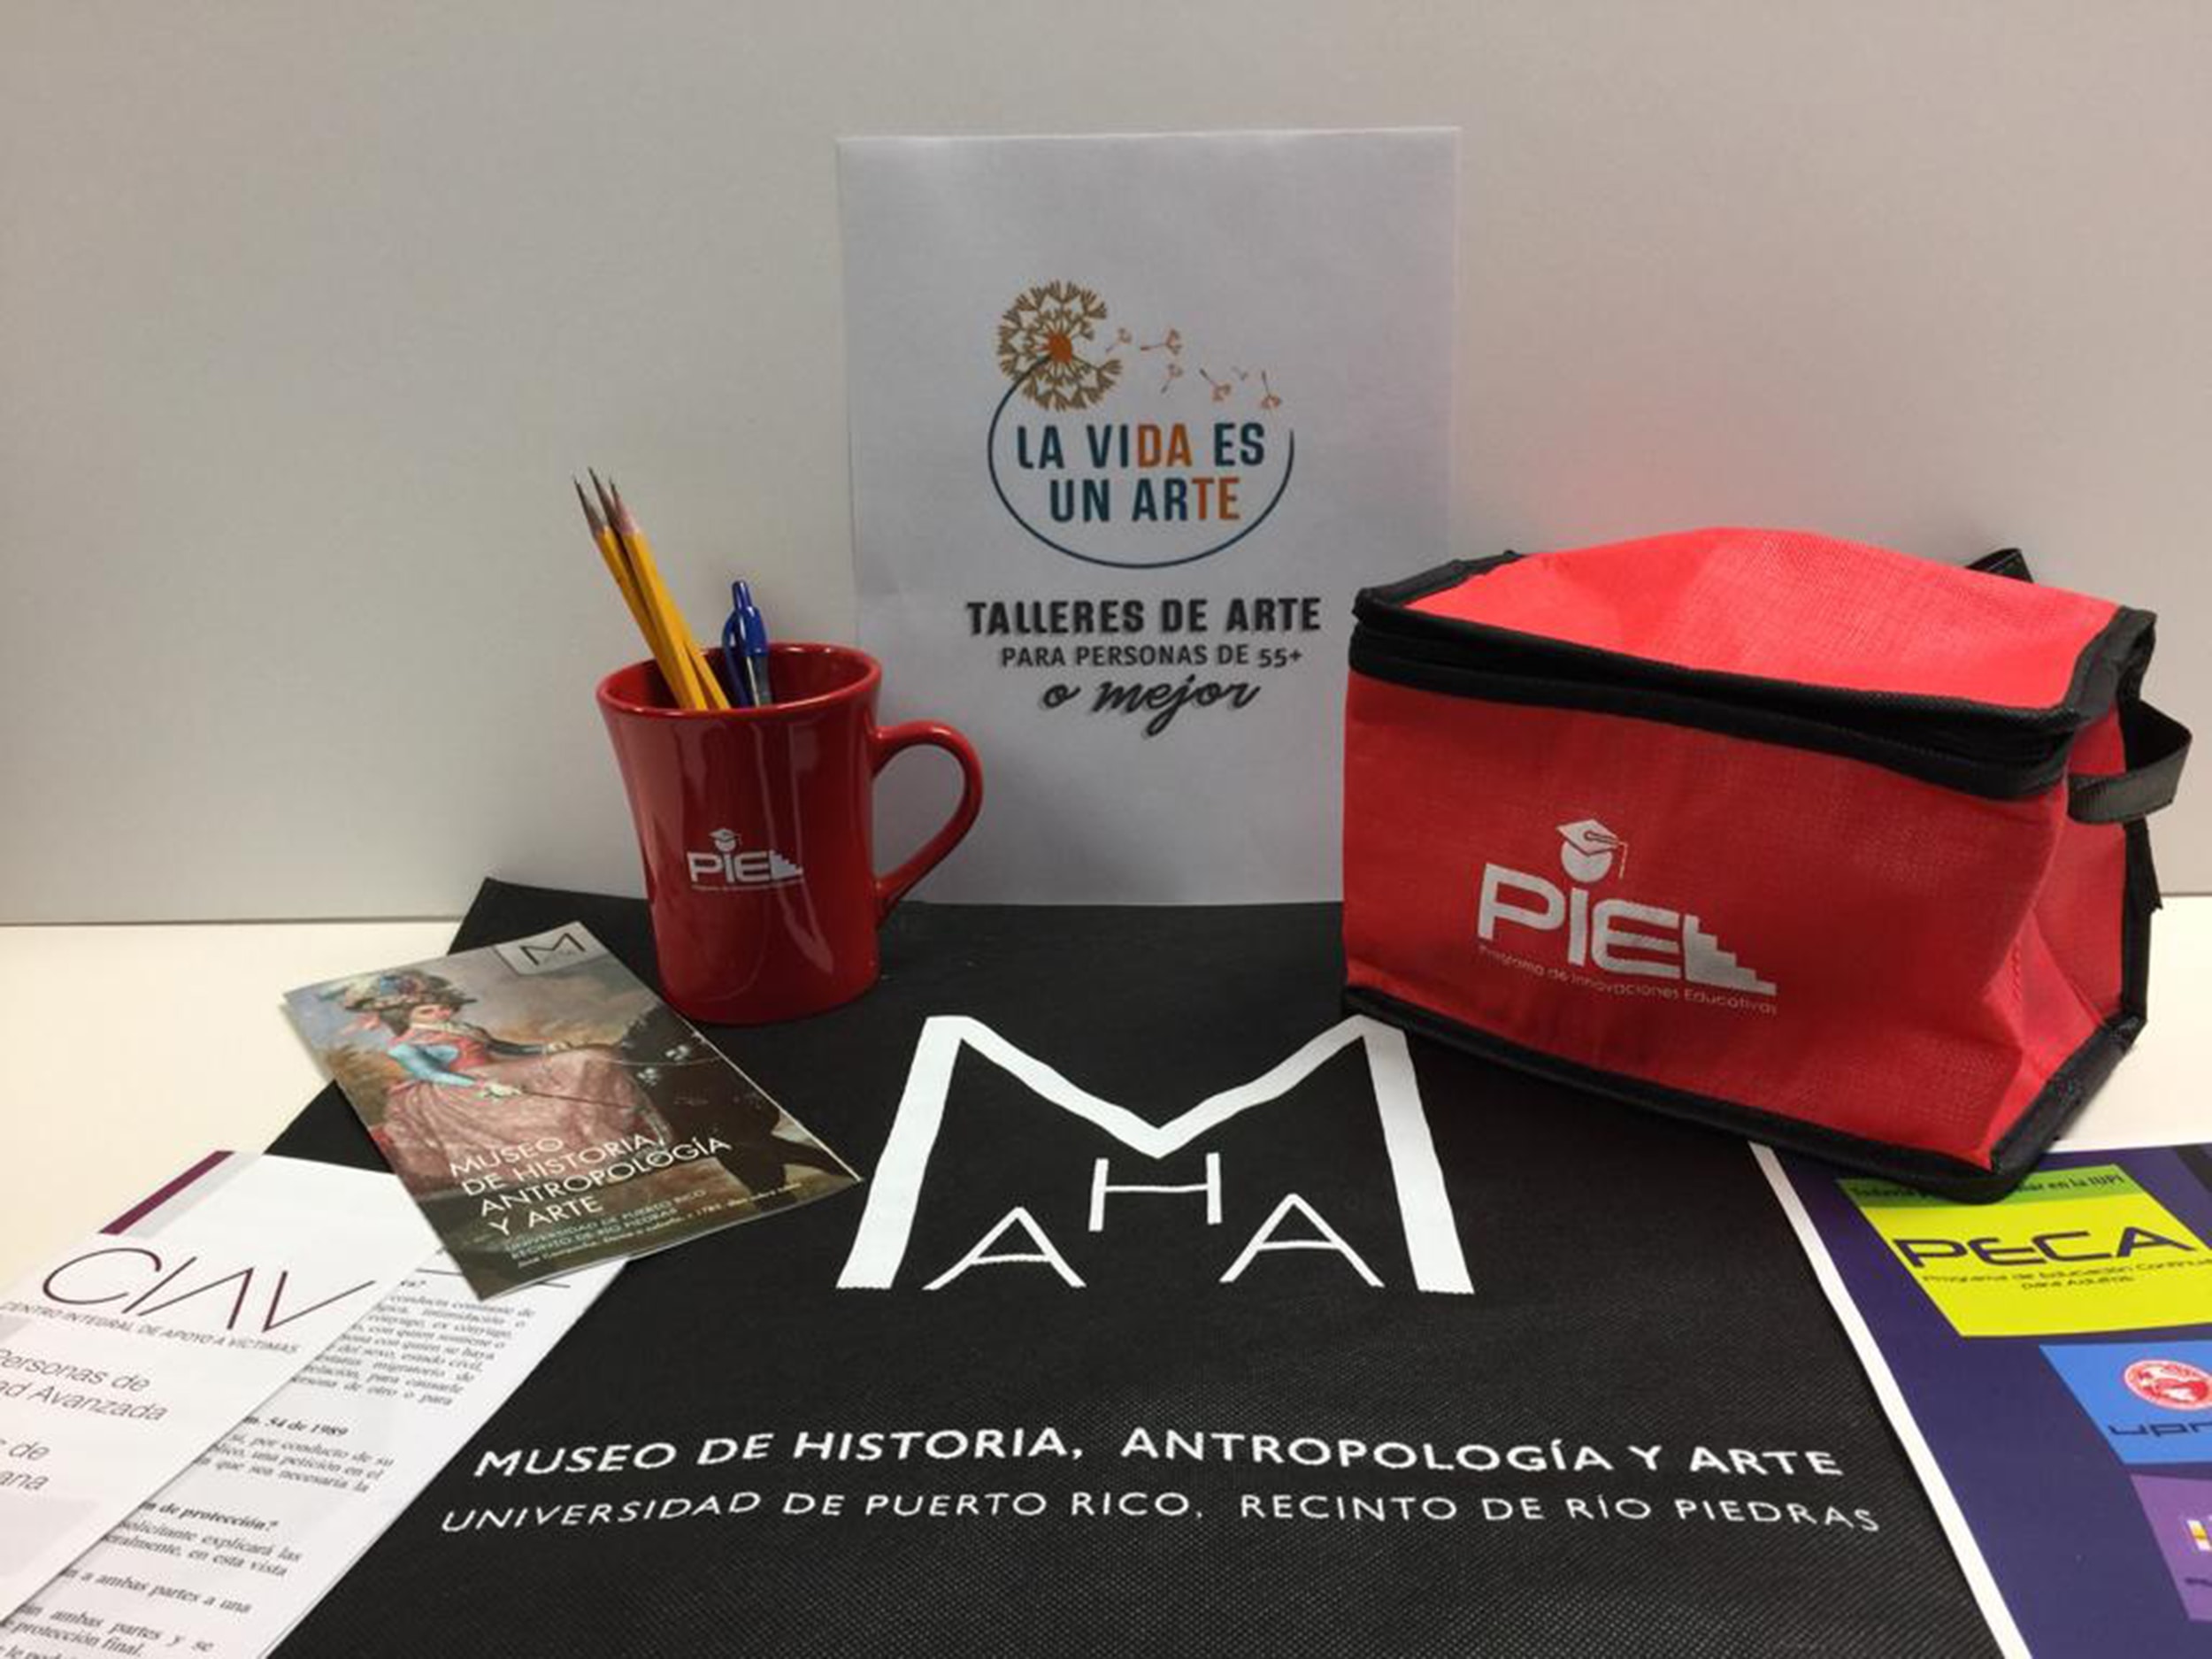 A sign for the program reads "La vida es un arte / Talleres de arte para personas de 55+ o mejor." Underneath is a a mug and lunchbox filled with goodies distributed to participants.